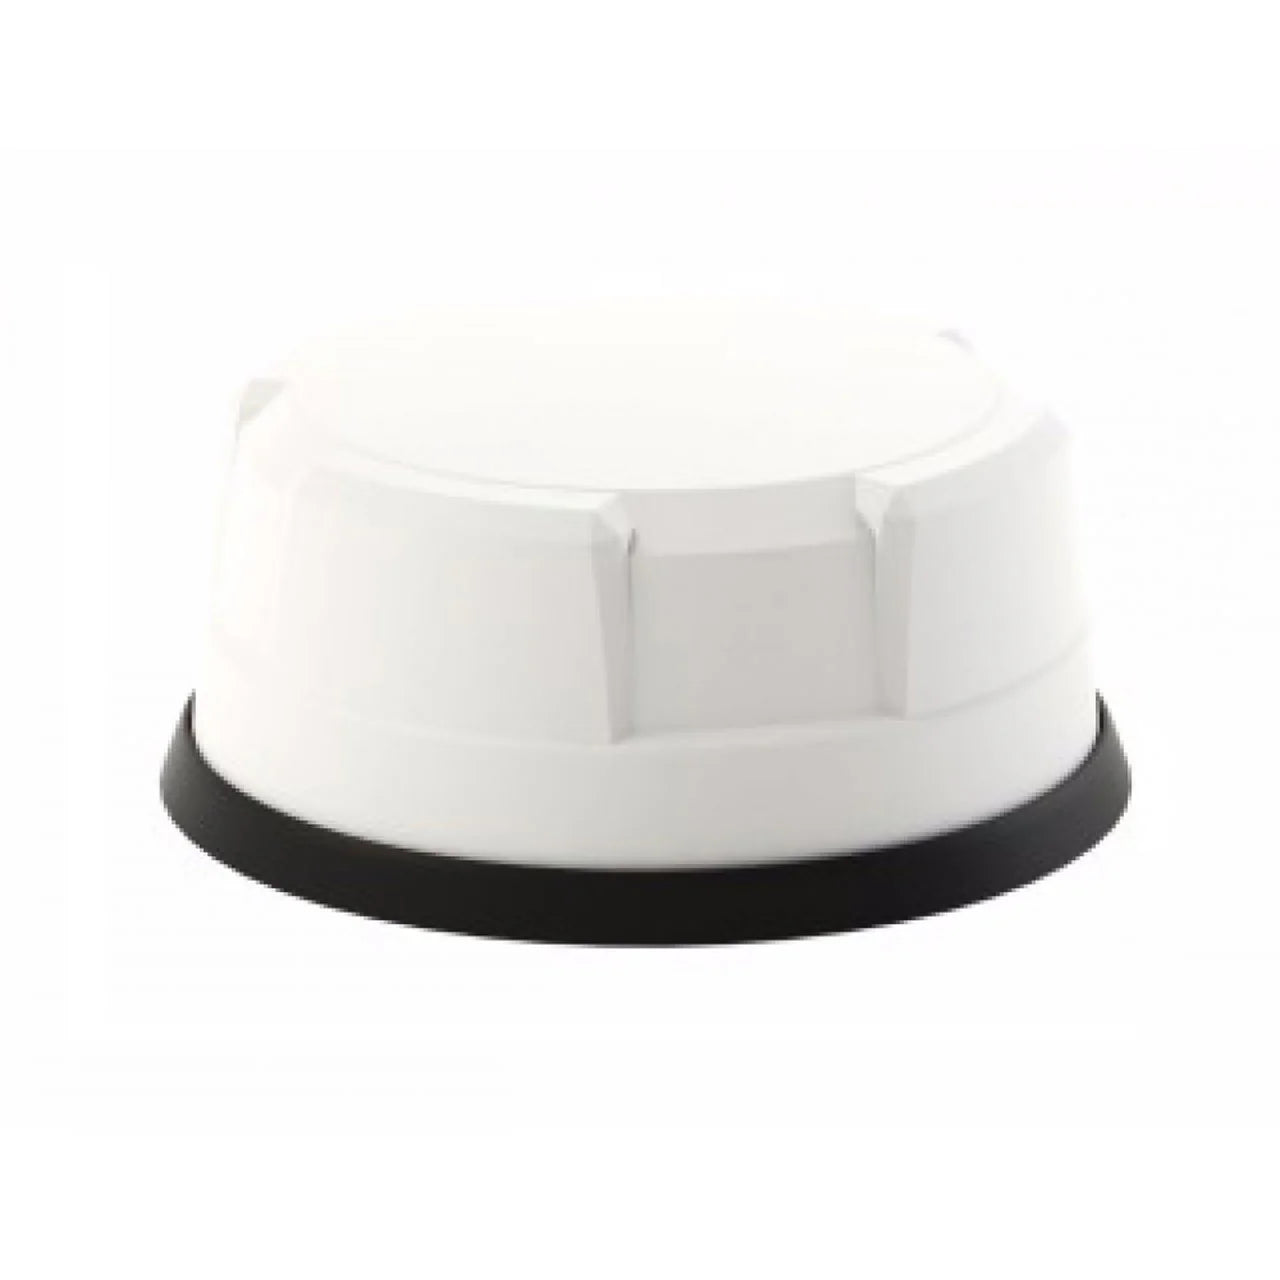 6001445 - 5in1 Dome Antenna - 4x5G/LTE, GNSS, Bolt Mount, 5m, Fakra, White